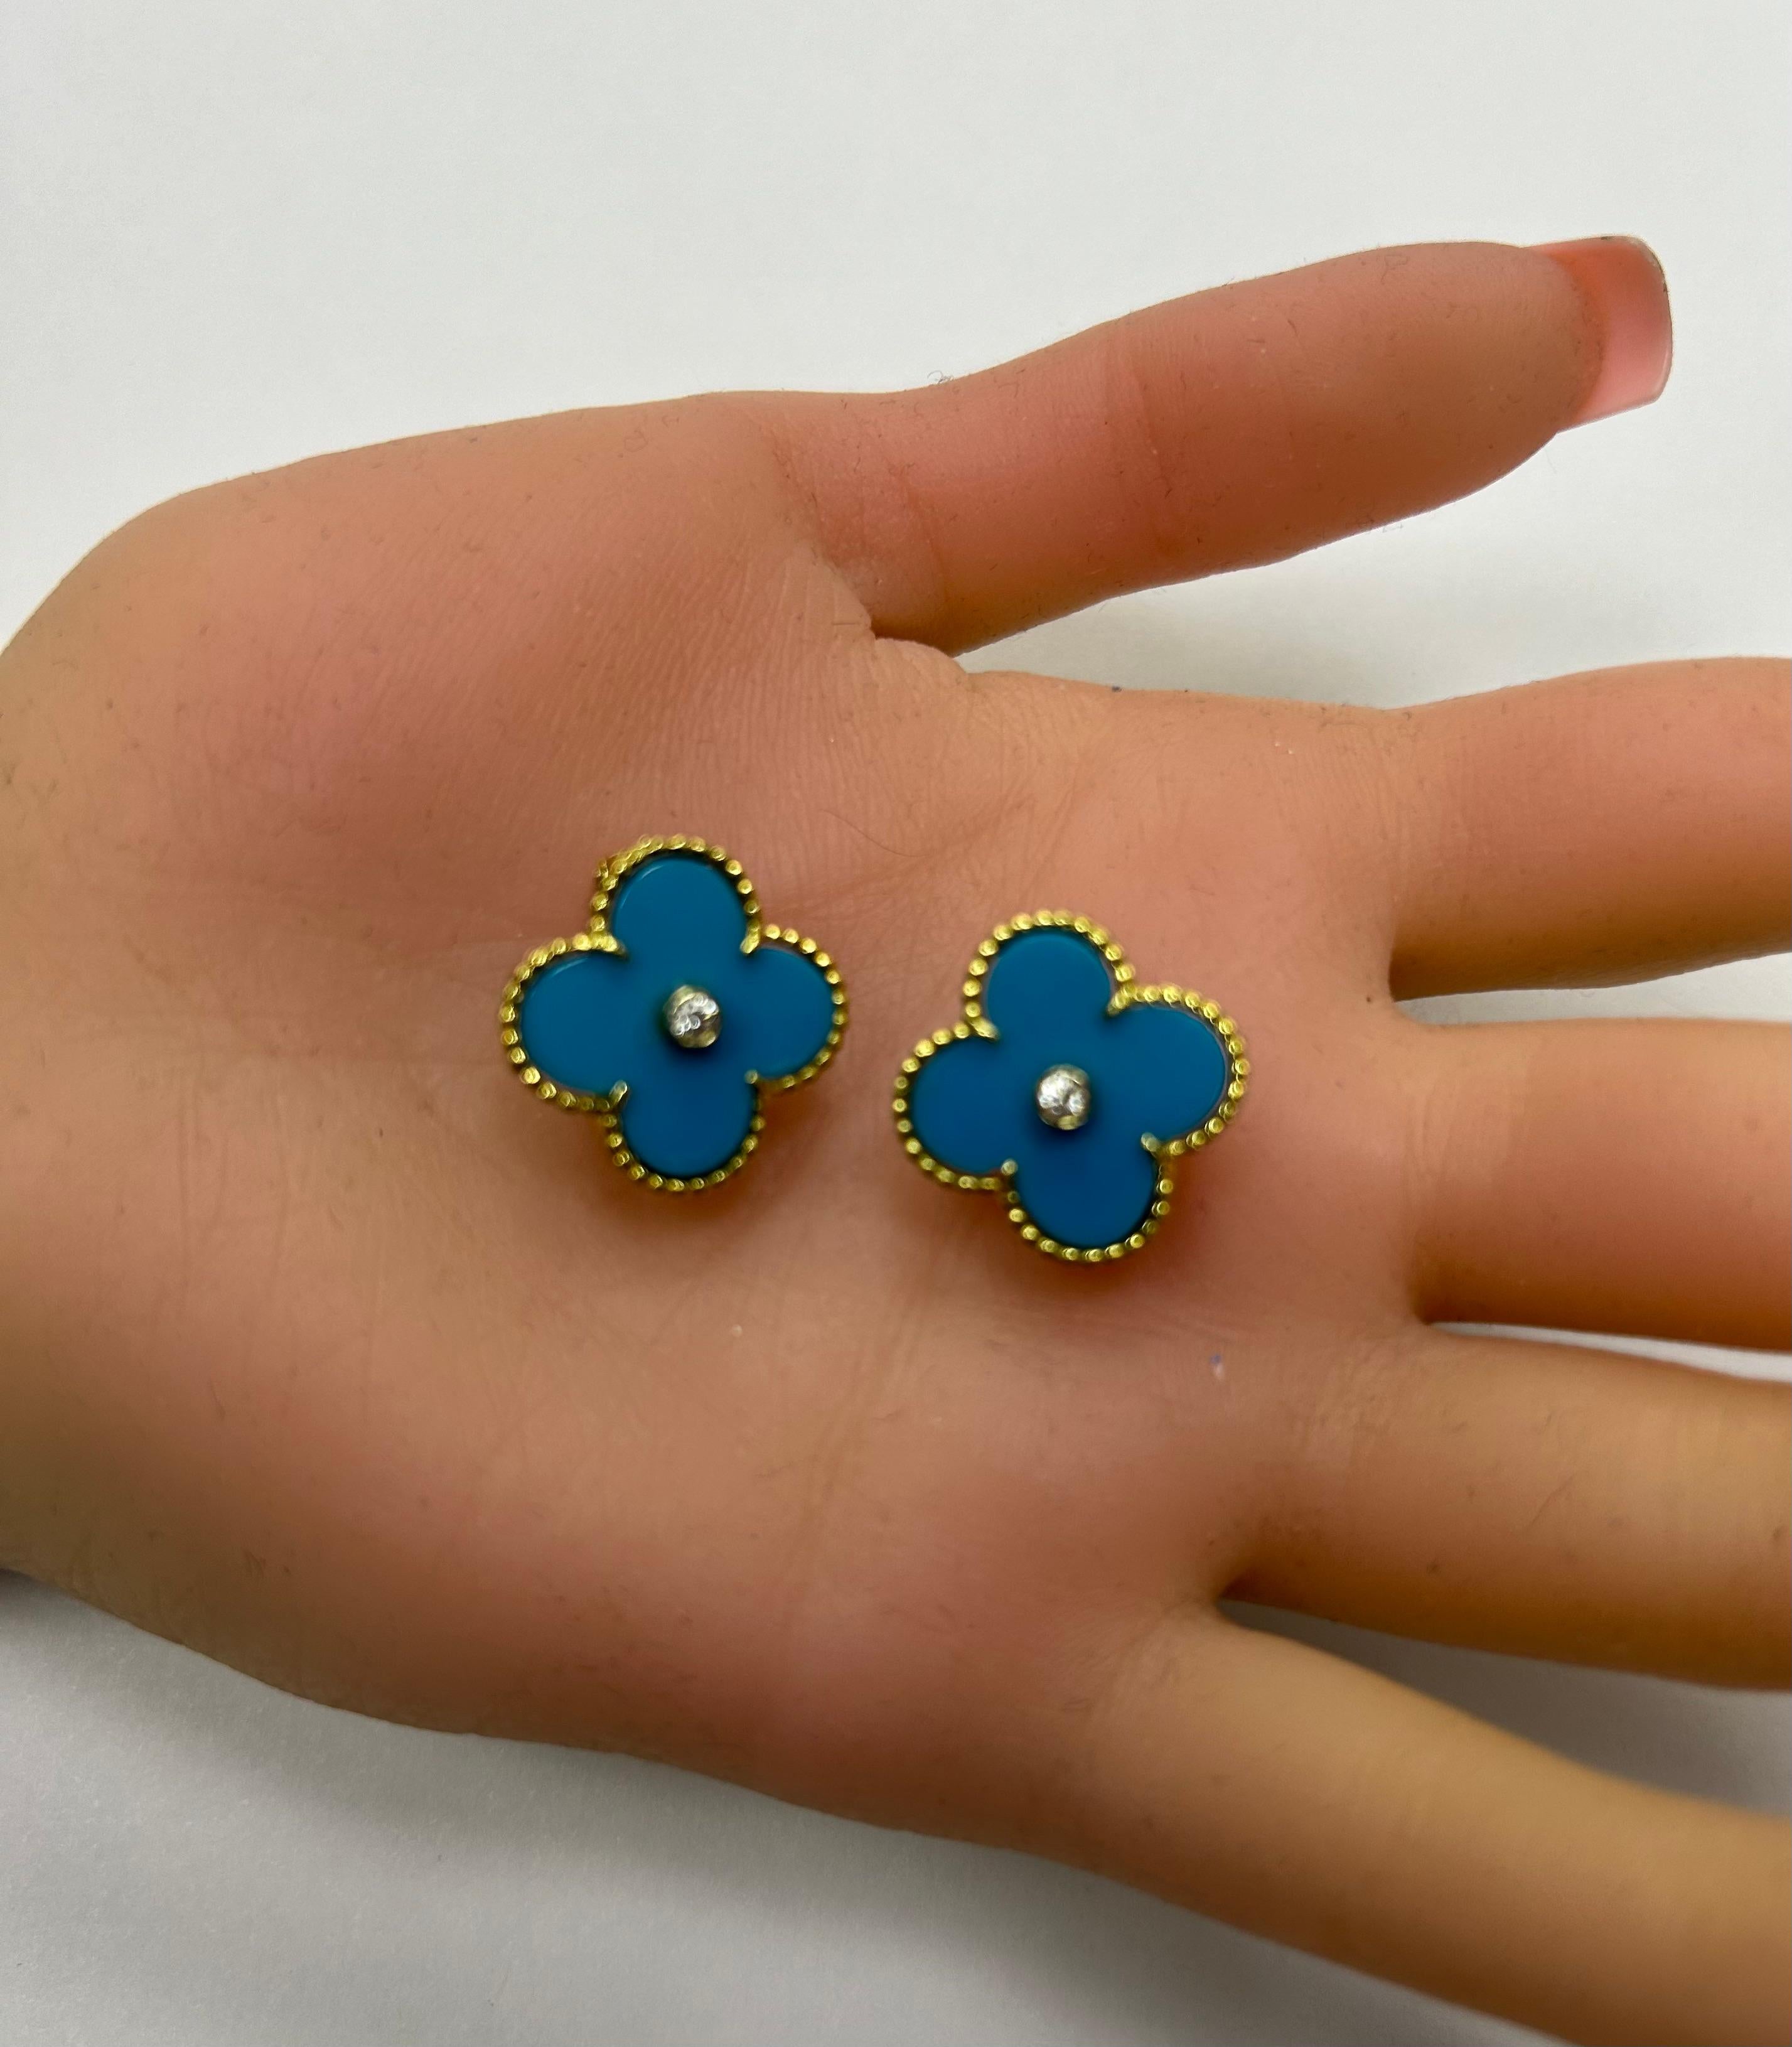 4 Leaf Clover 18k YG Turquoise Diamond Ear Clip Earrings In Excellent Condition For Sale In New York, NY